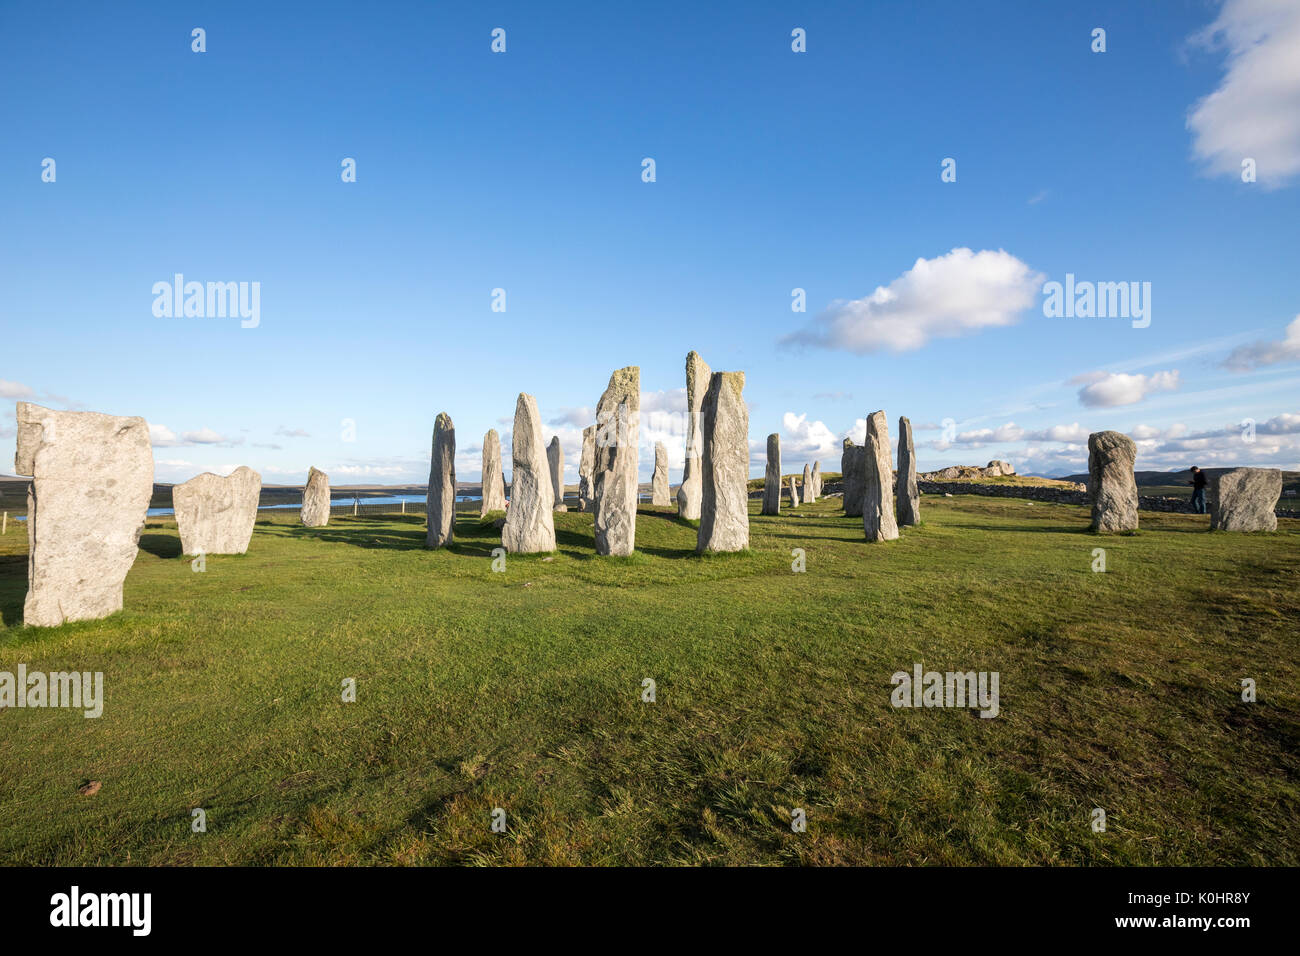 Callanish Standing Stones, standing stones placed in a cruciform pattern with a central stone circle, Callanish, Scotland, UK Stock Photo